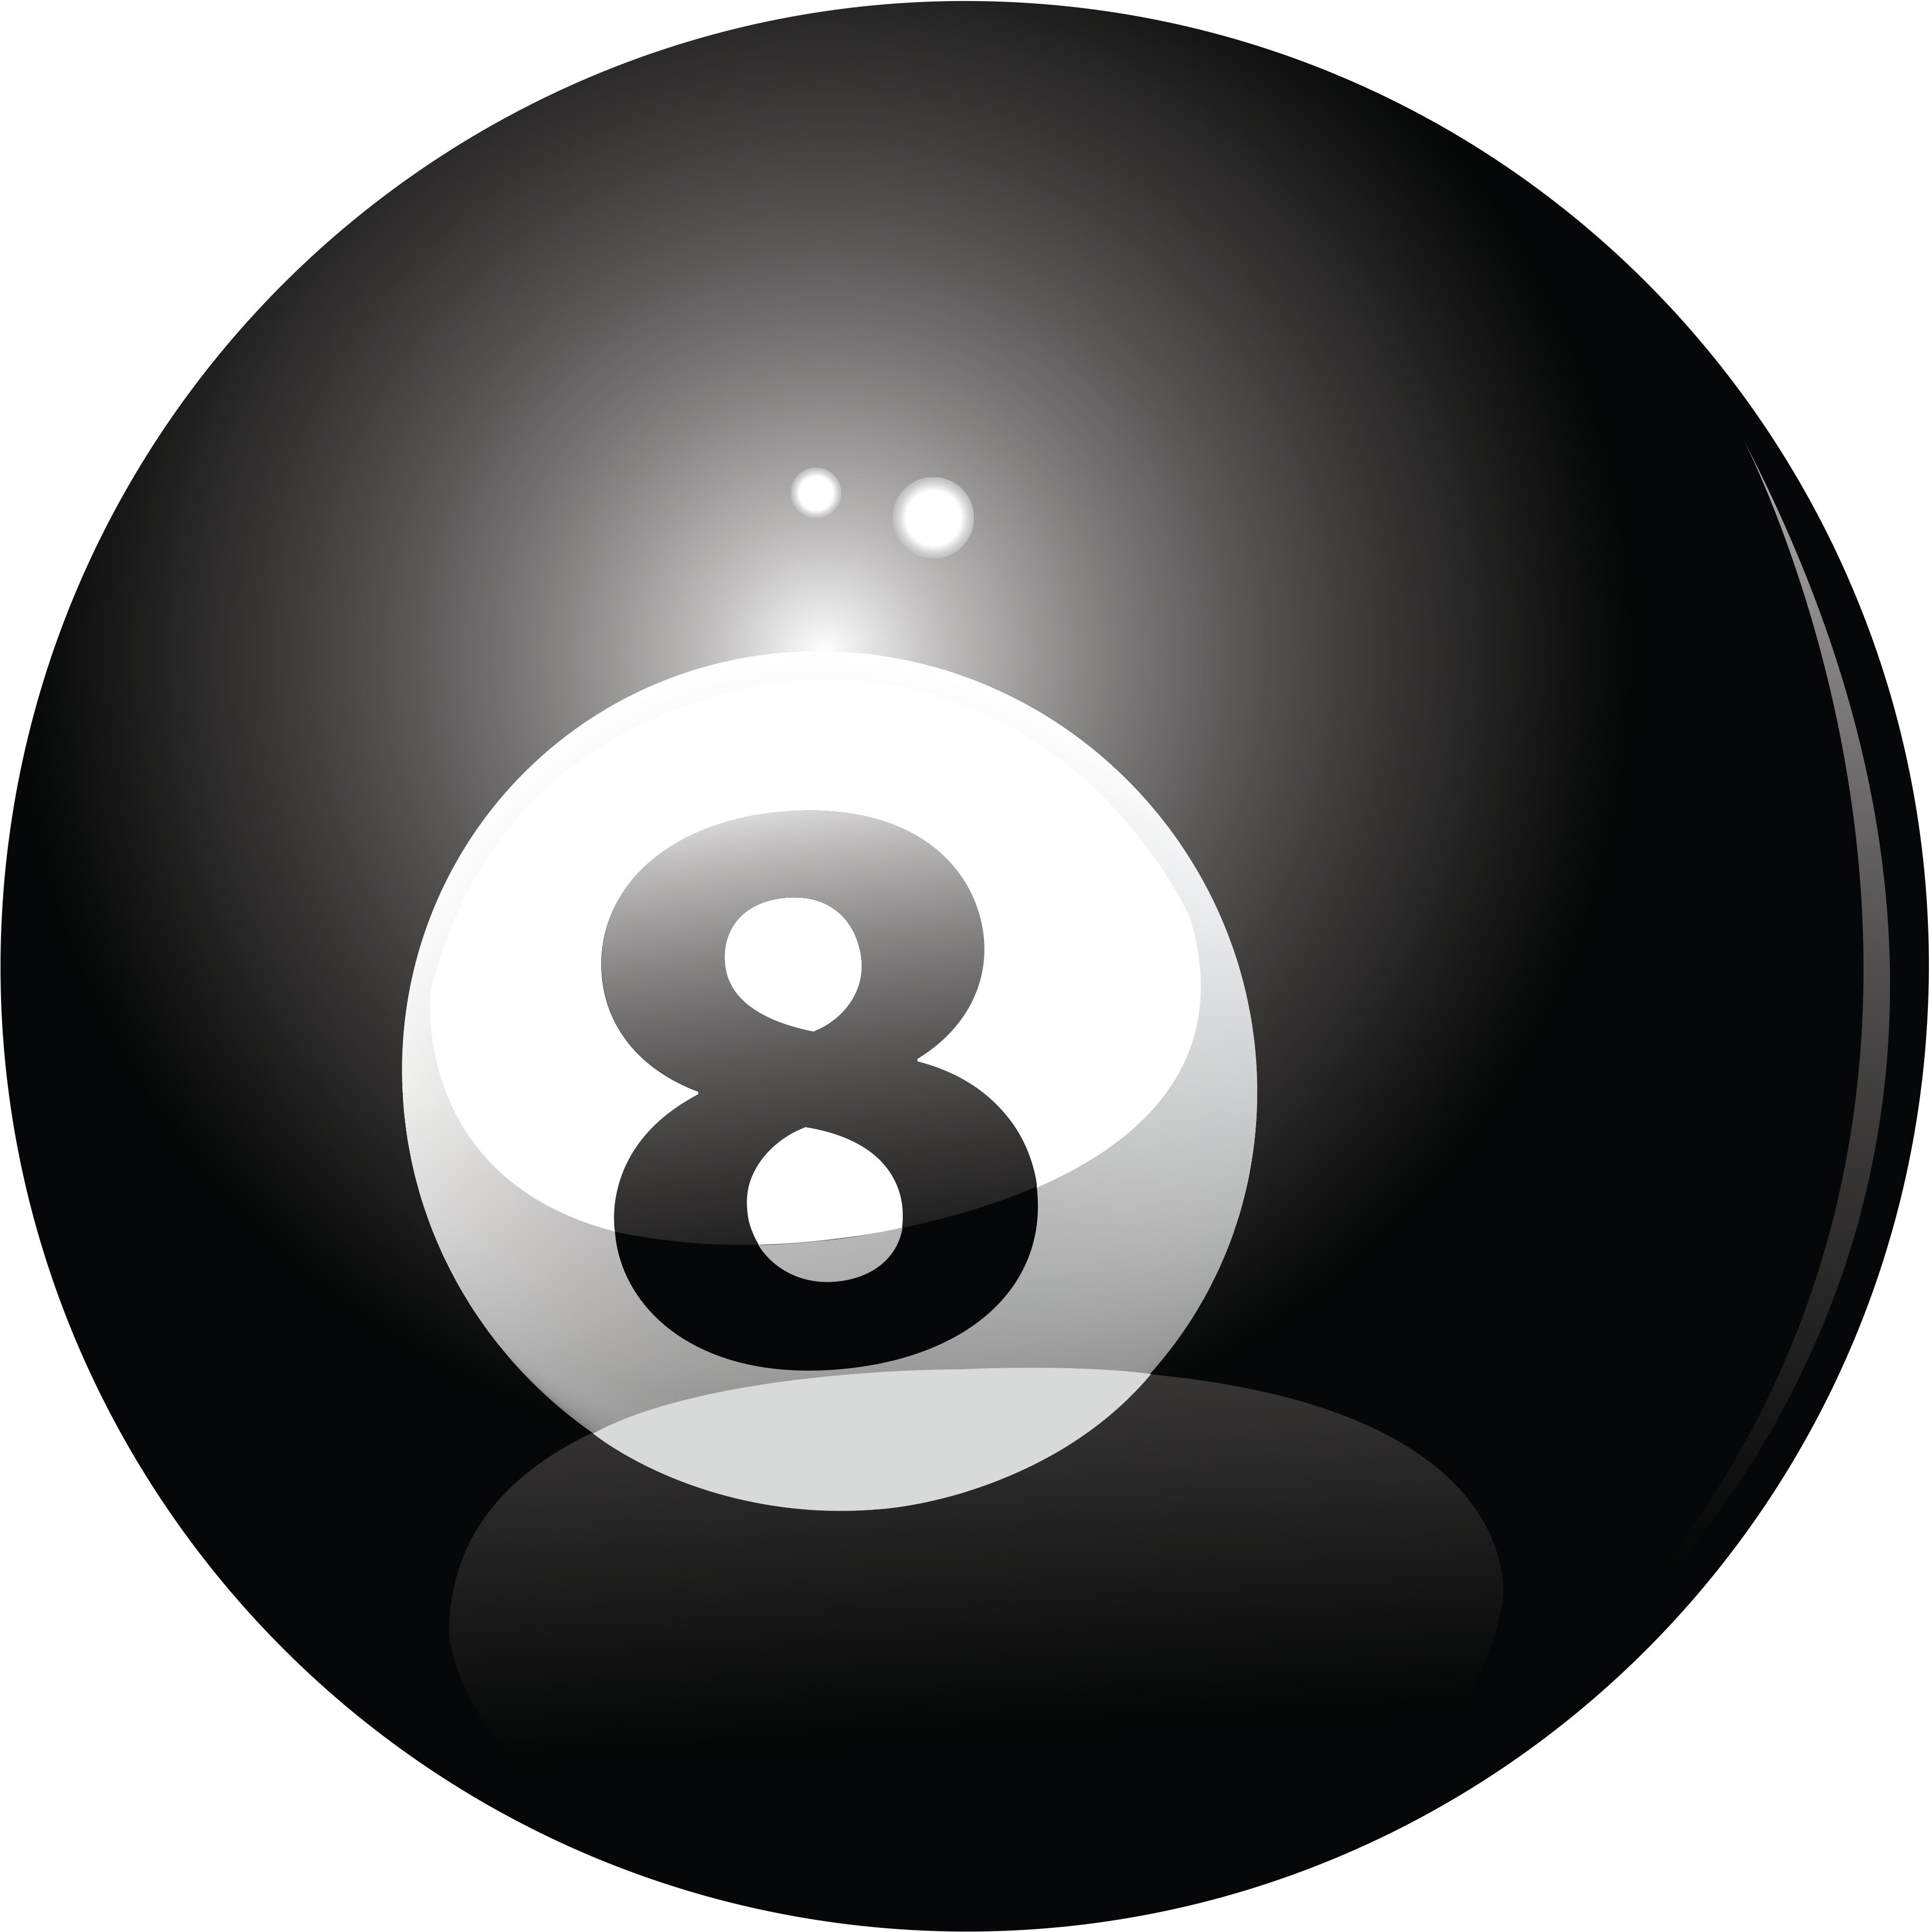 A Black And White Image Of A Pool Ball With A Number